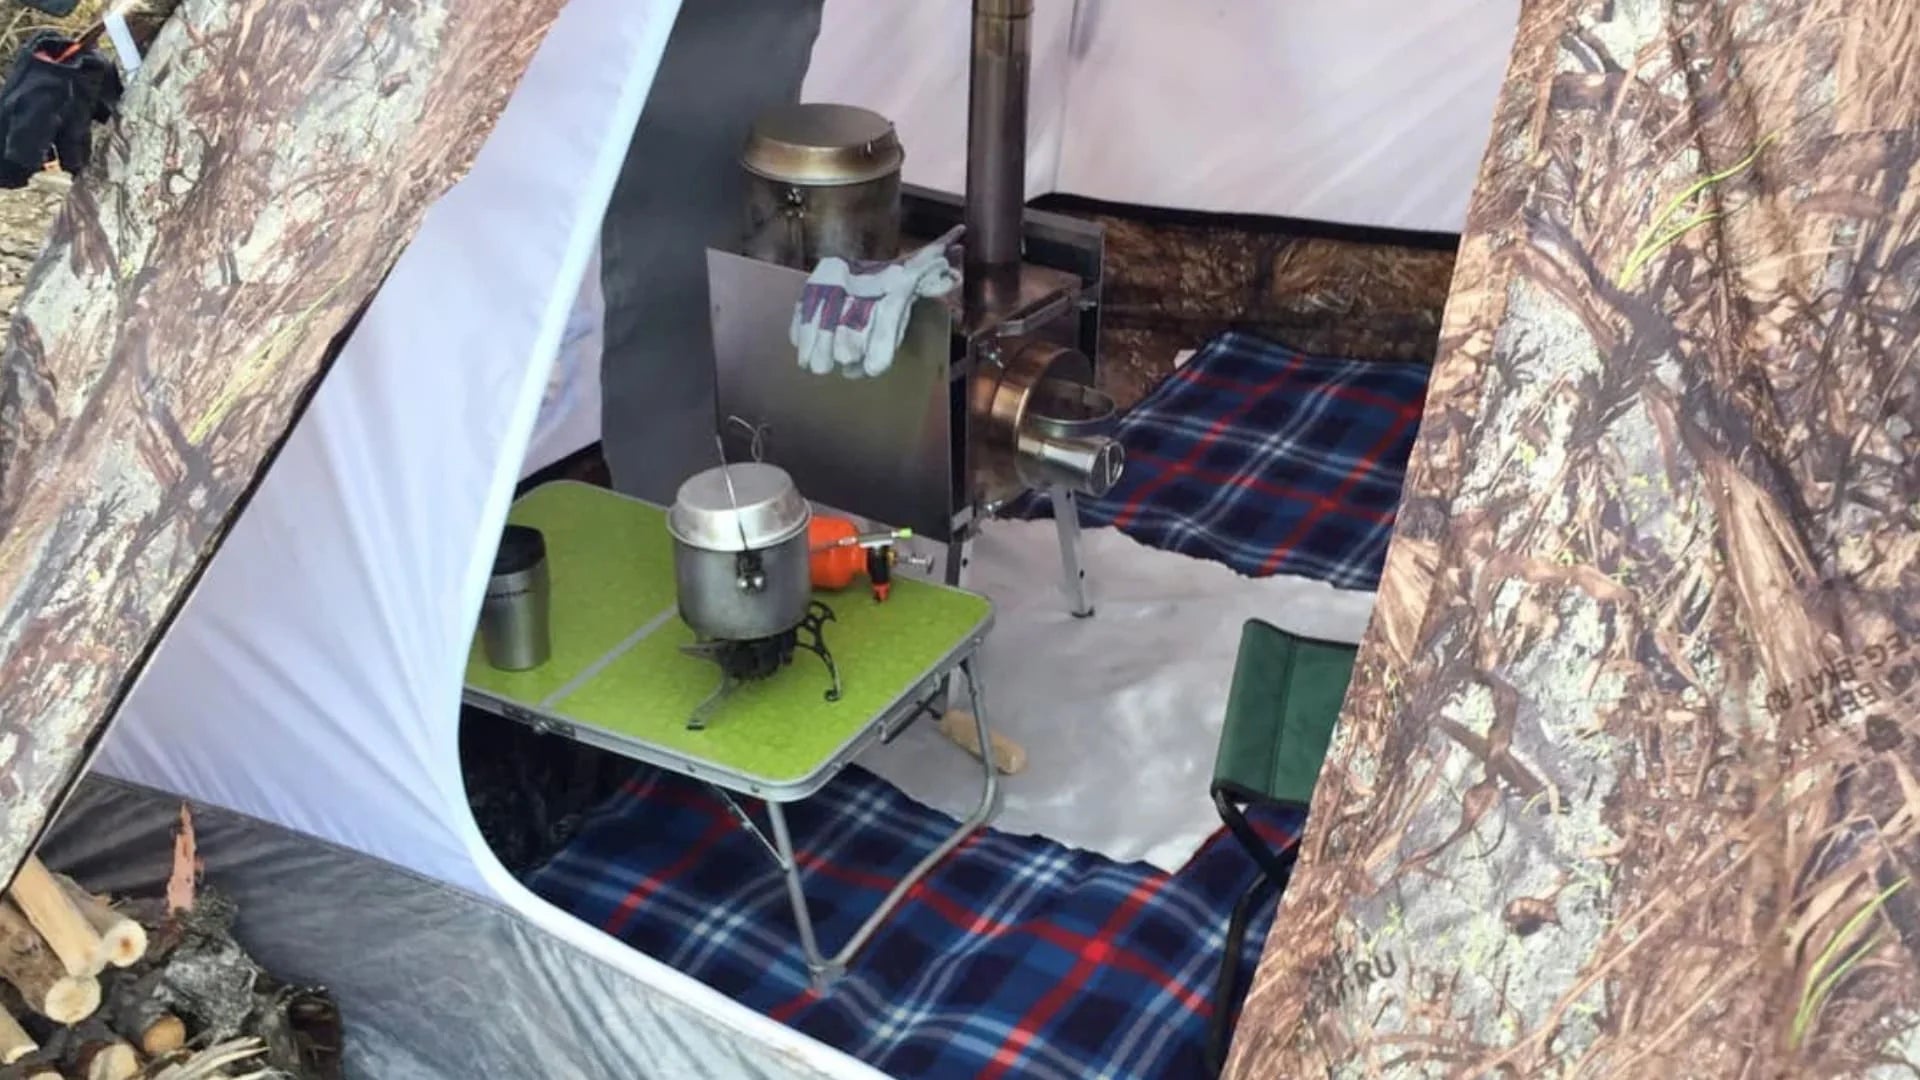 RBM Outdoors - All-Season Tent with Stove Jack "Sputnik-3". Best tent for 1- 3 person - Big Horn Golfer